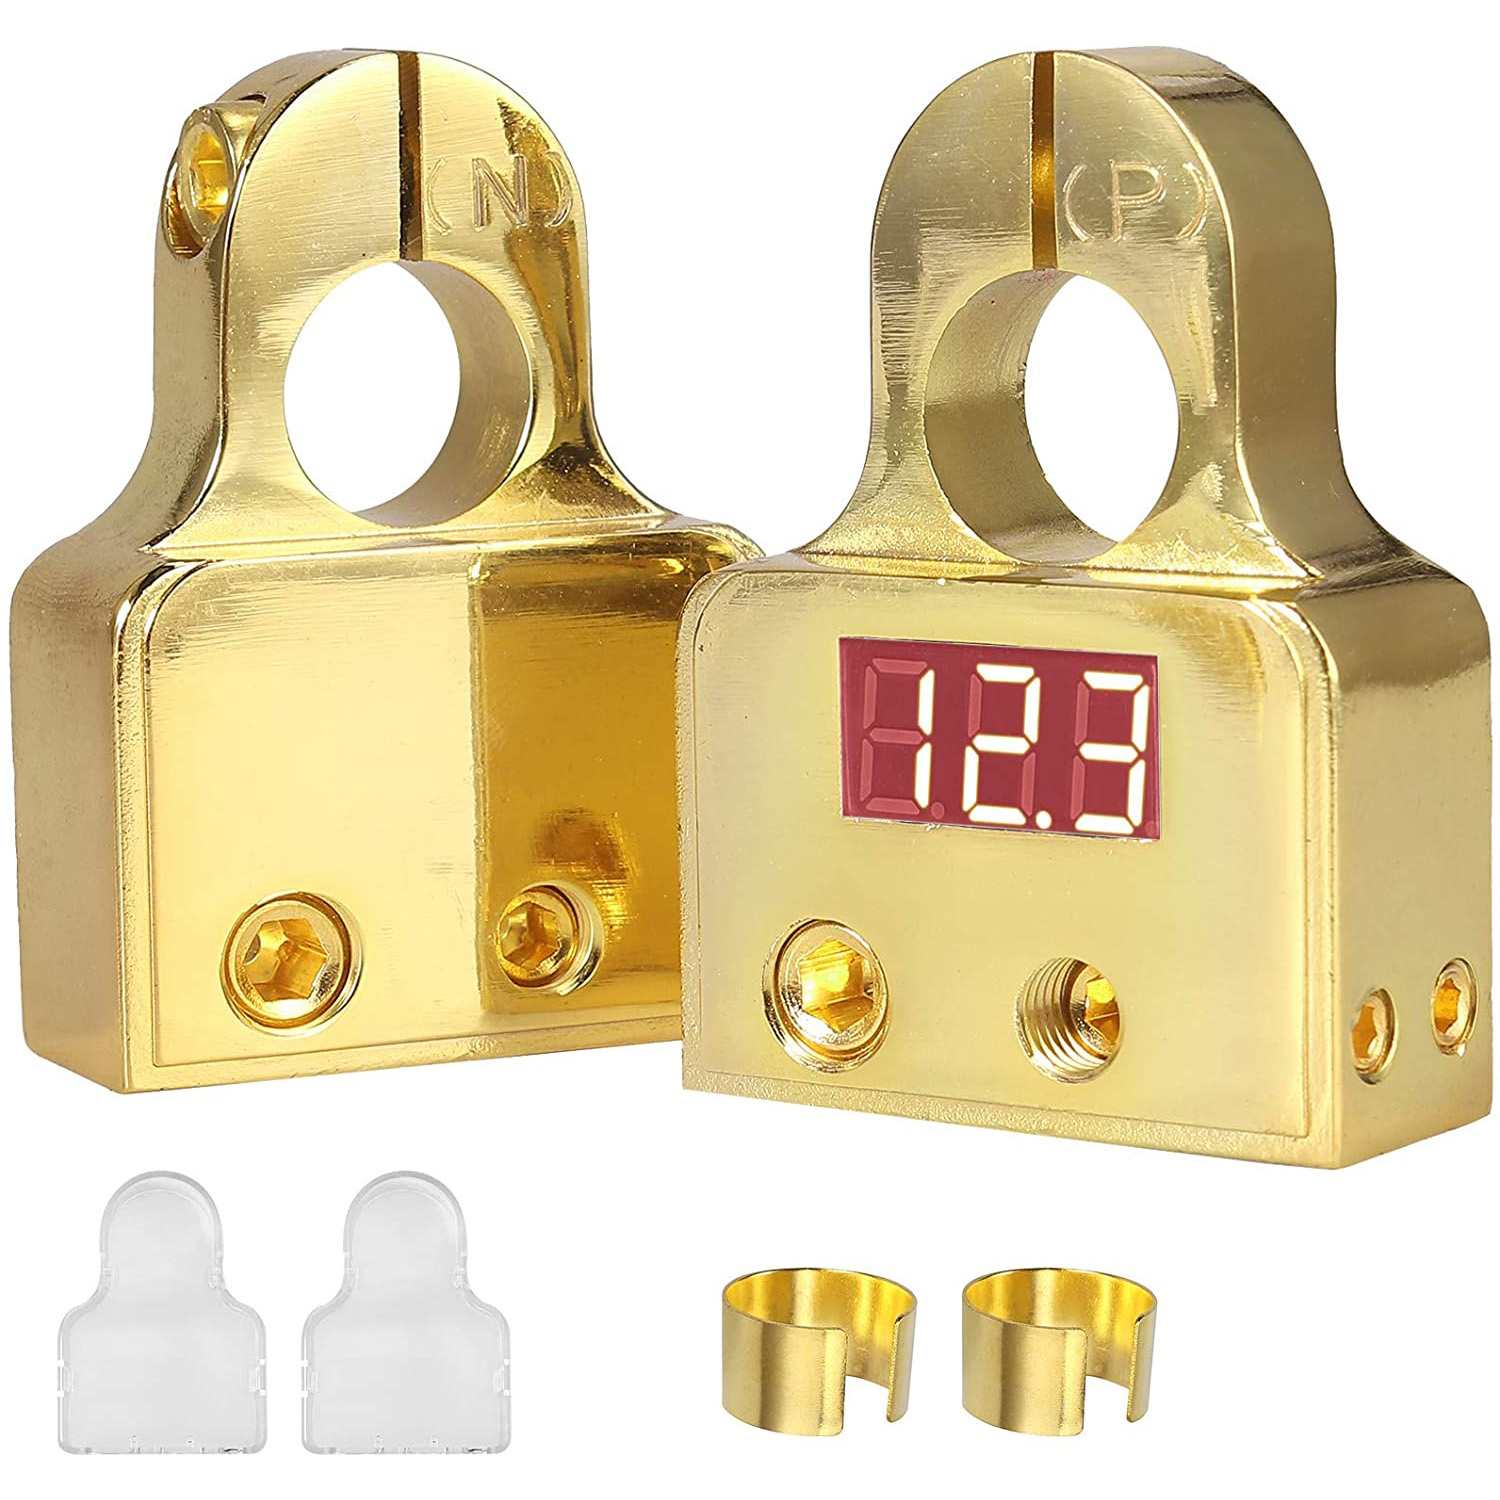 1 Pair QWORK Battery Terminals Solid Brass Battery Clamps Connectors Quick Release for RV Motorbike Car Truck Boat Caravan 